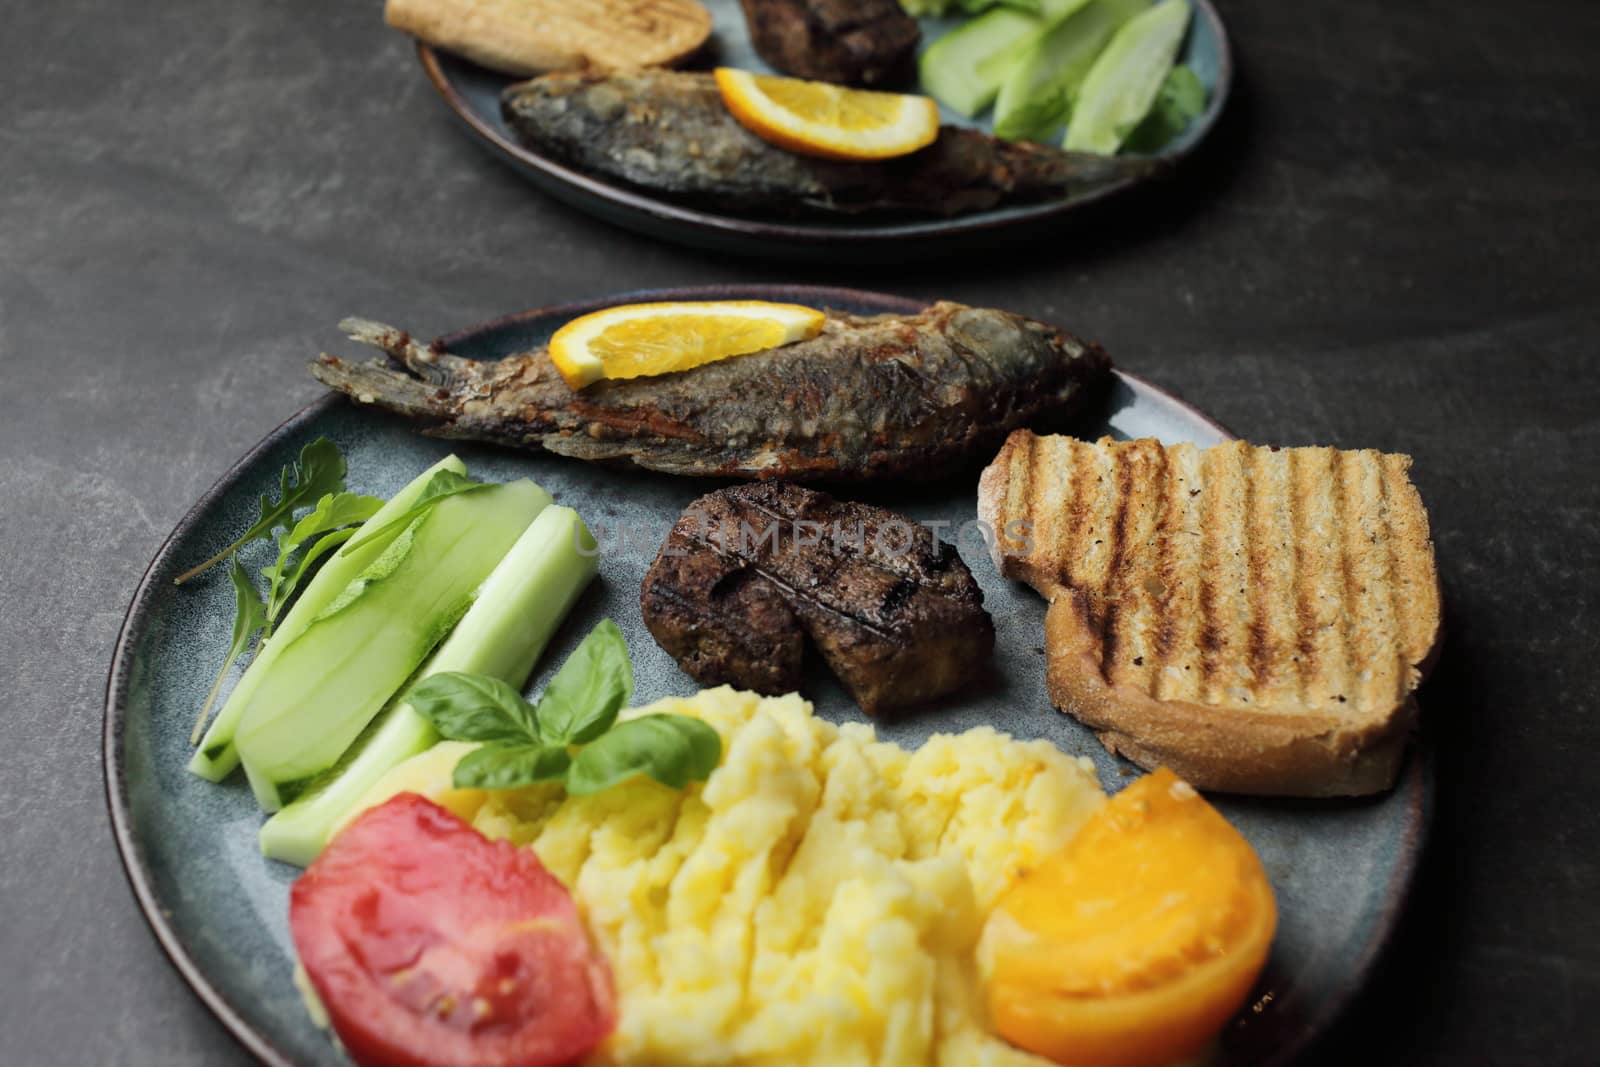 Fried fish, meat steak and vegetables on a plate. Concrete gray countertop. High quality photo